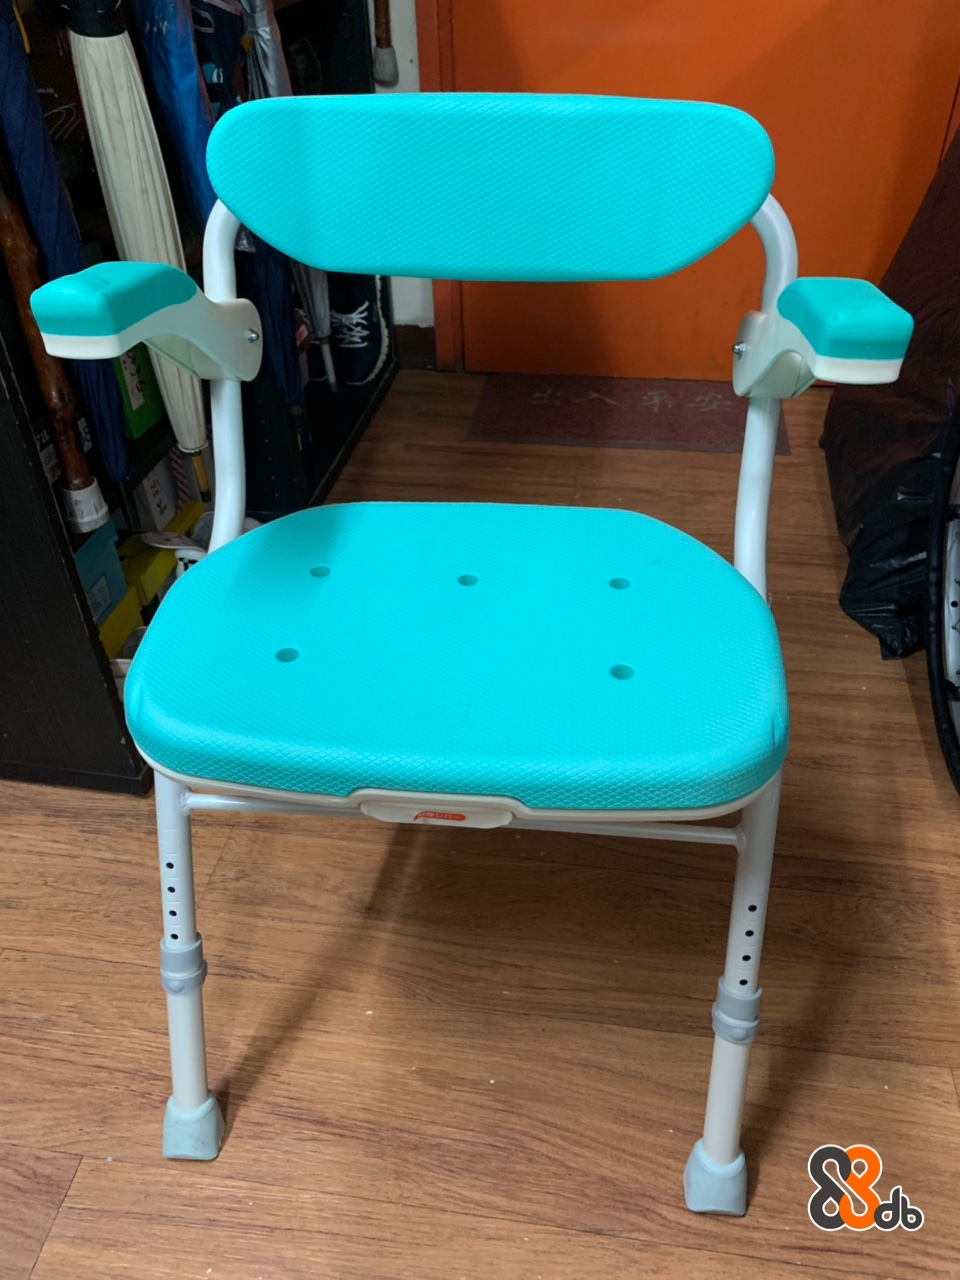  Chair,Furniture,Turquoise,Table,Turquoise